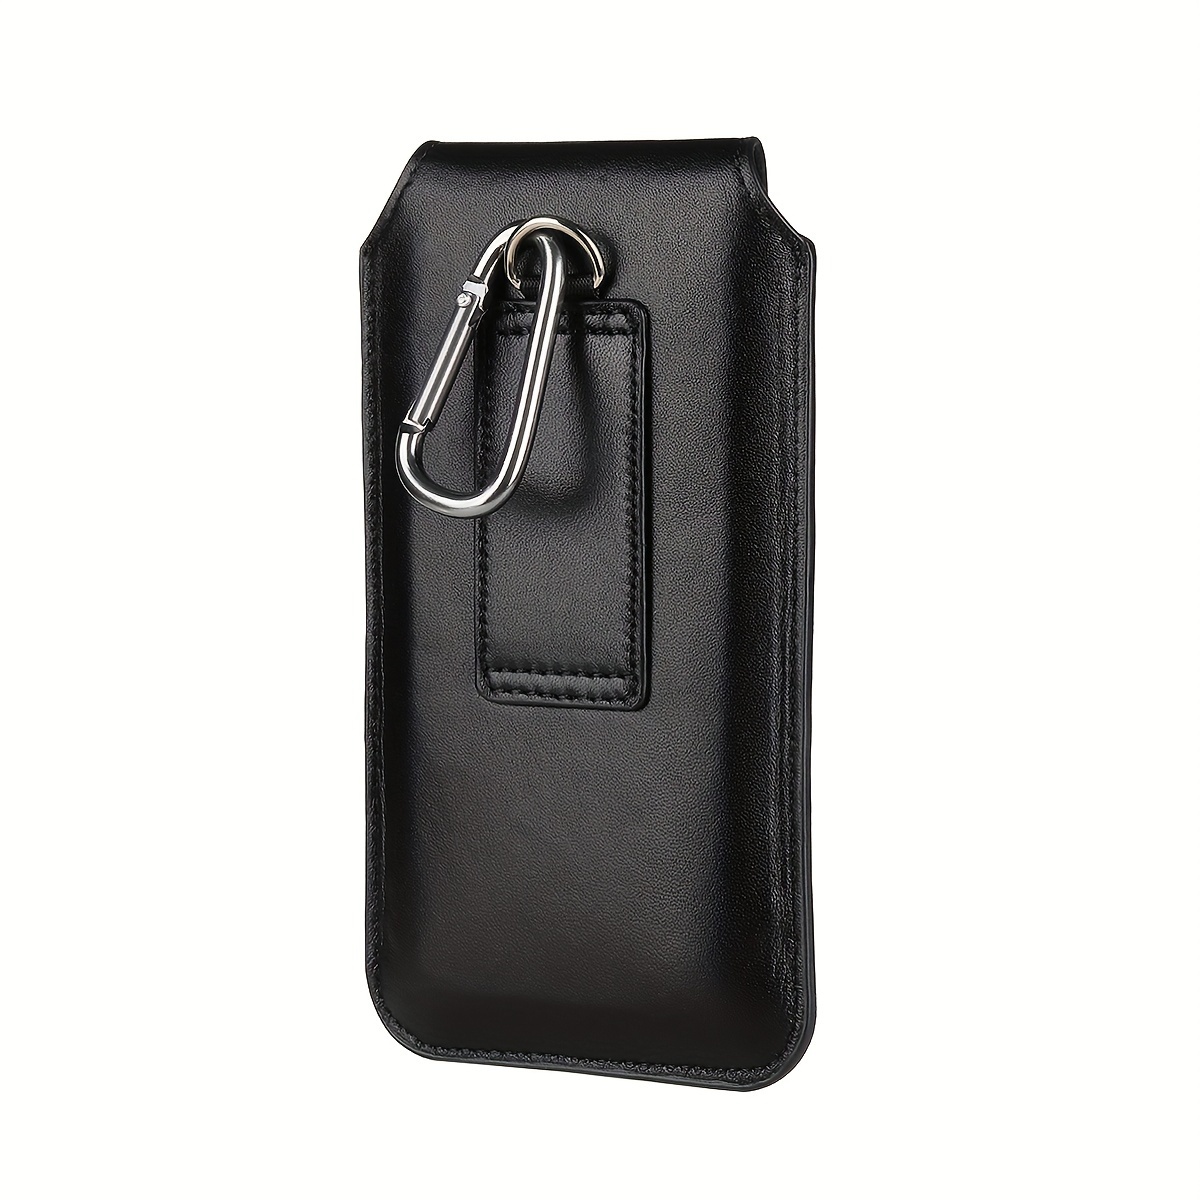 portable dual brown and black faux leather phone case with a belt loop for easy carrying includes a spring clip carabiner for hanging on backpacks waist belts and magnetic closure four sizes available for iphone samsung motorola